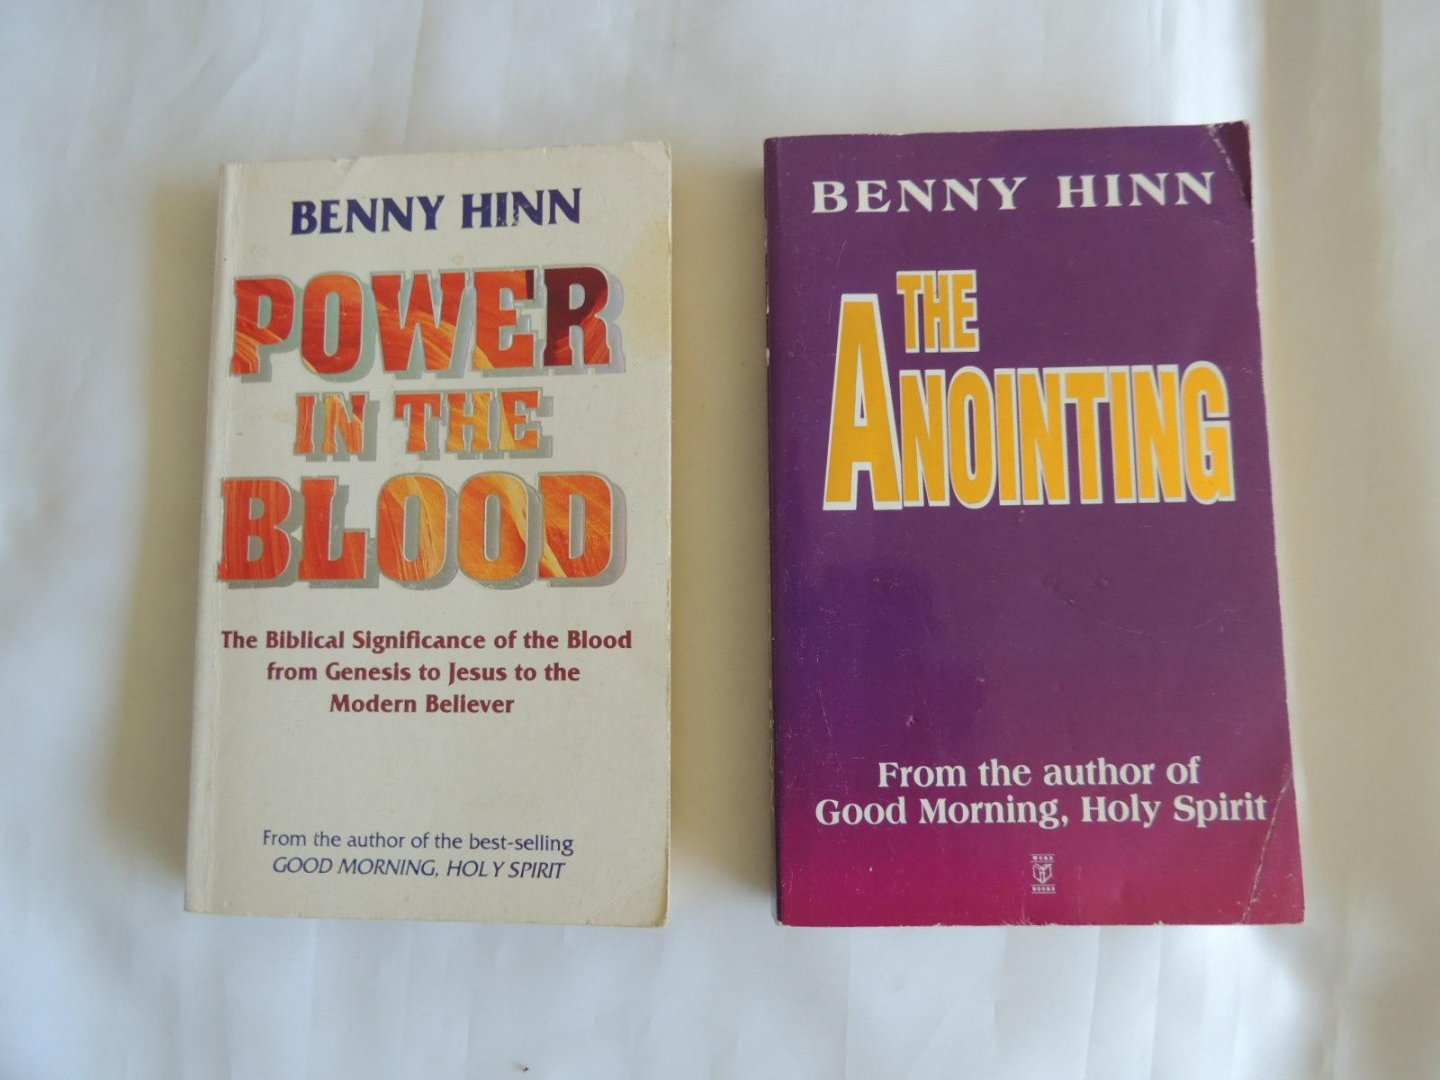 Hinn, Benny - Power in the Blood